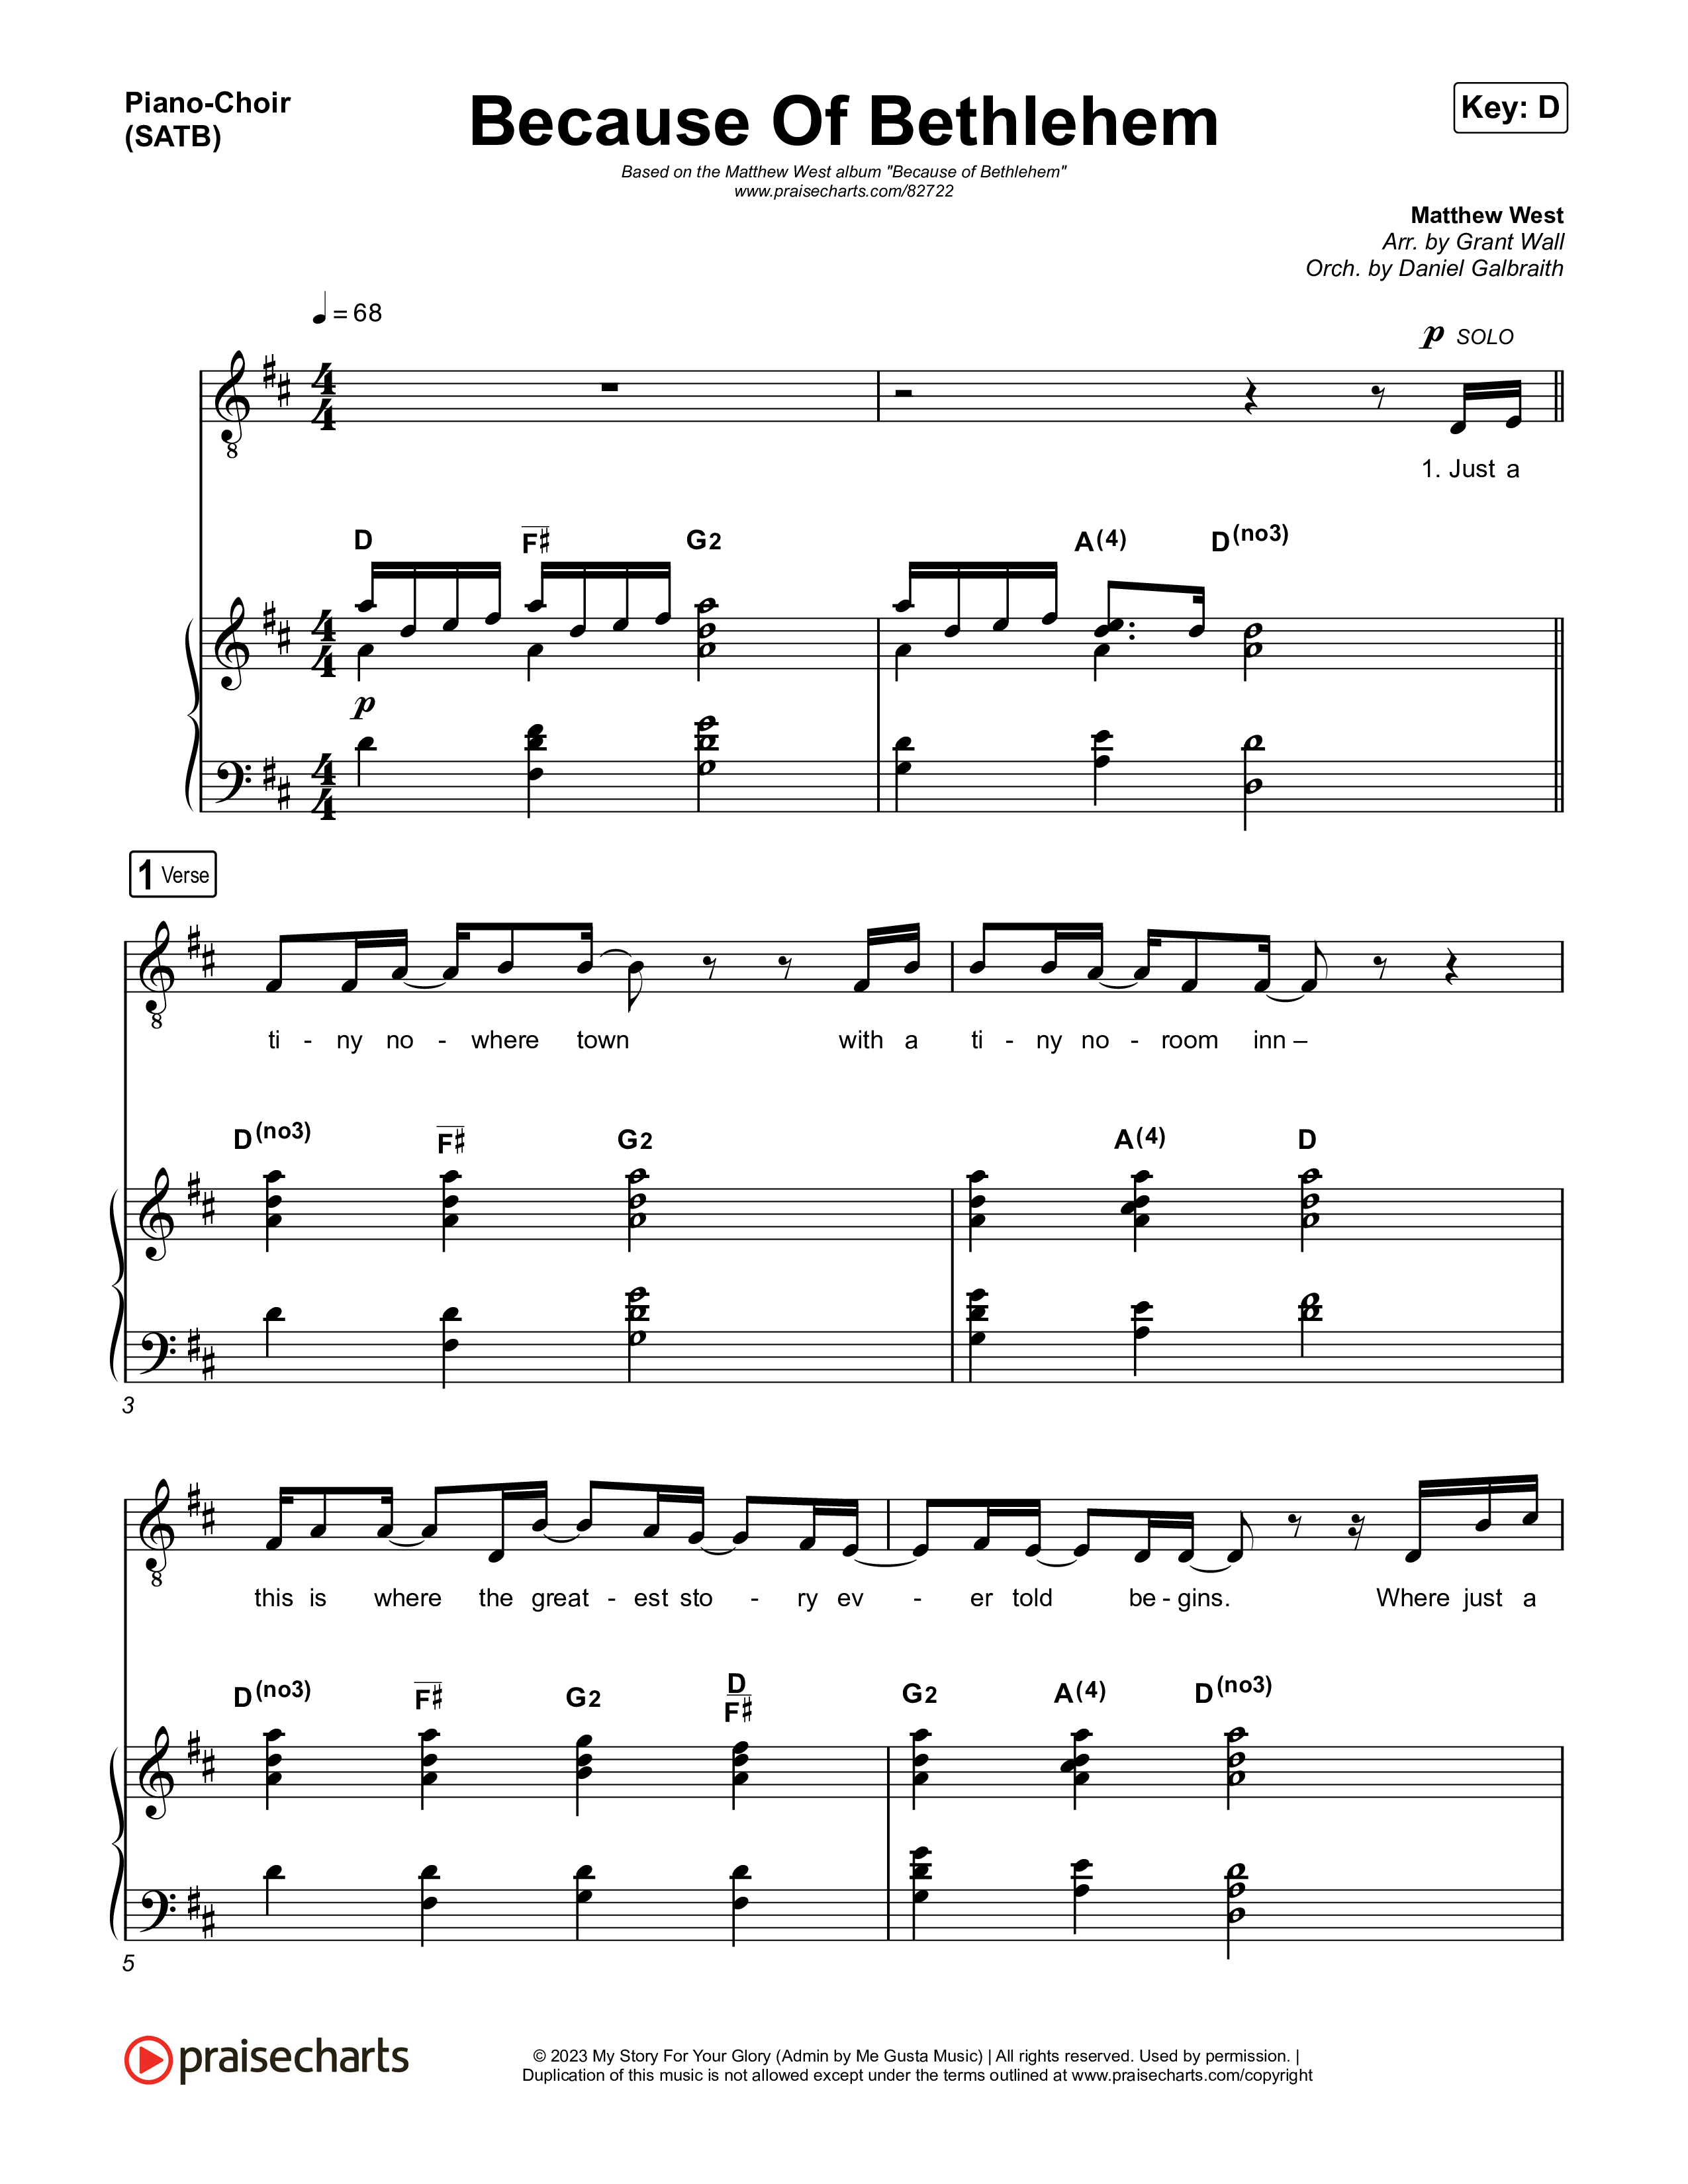 Because Of Bethlehem Piano/Vocal (SATB) (Matthew West)